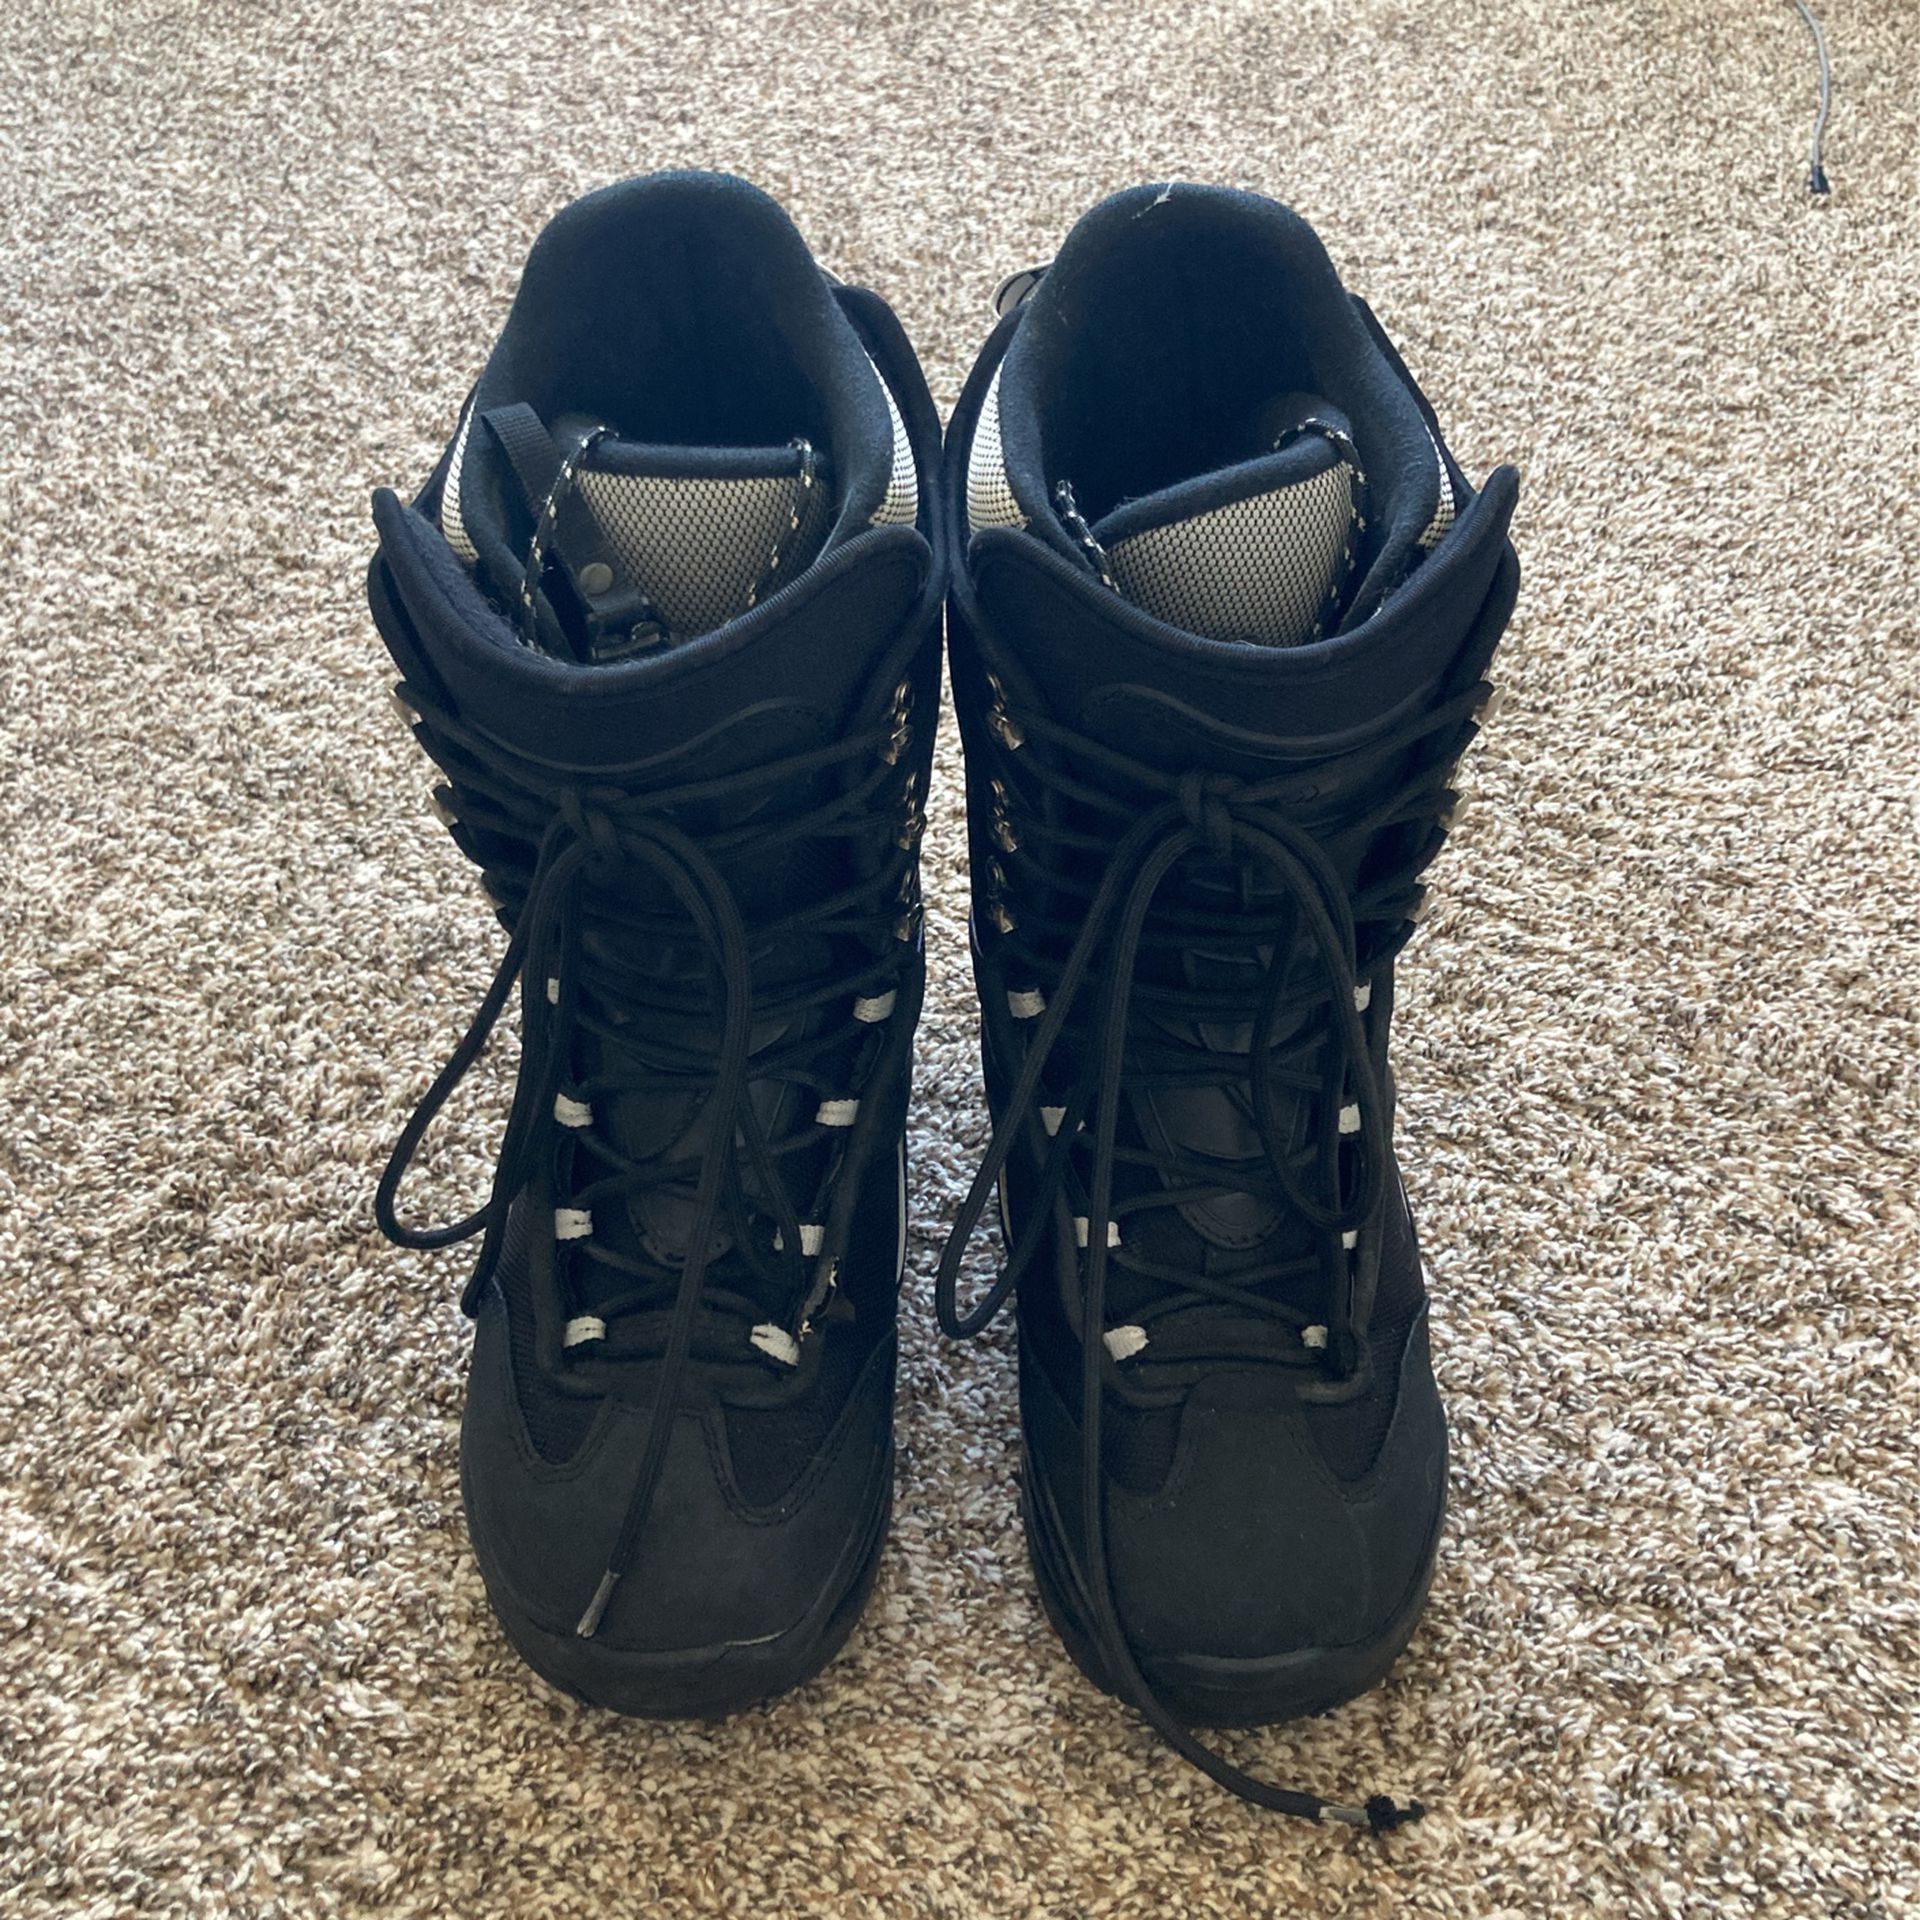 Northwave Fury Snowboard Boots Men’s 9 for Sale in New Lenox, IL - OfferUp